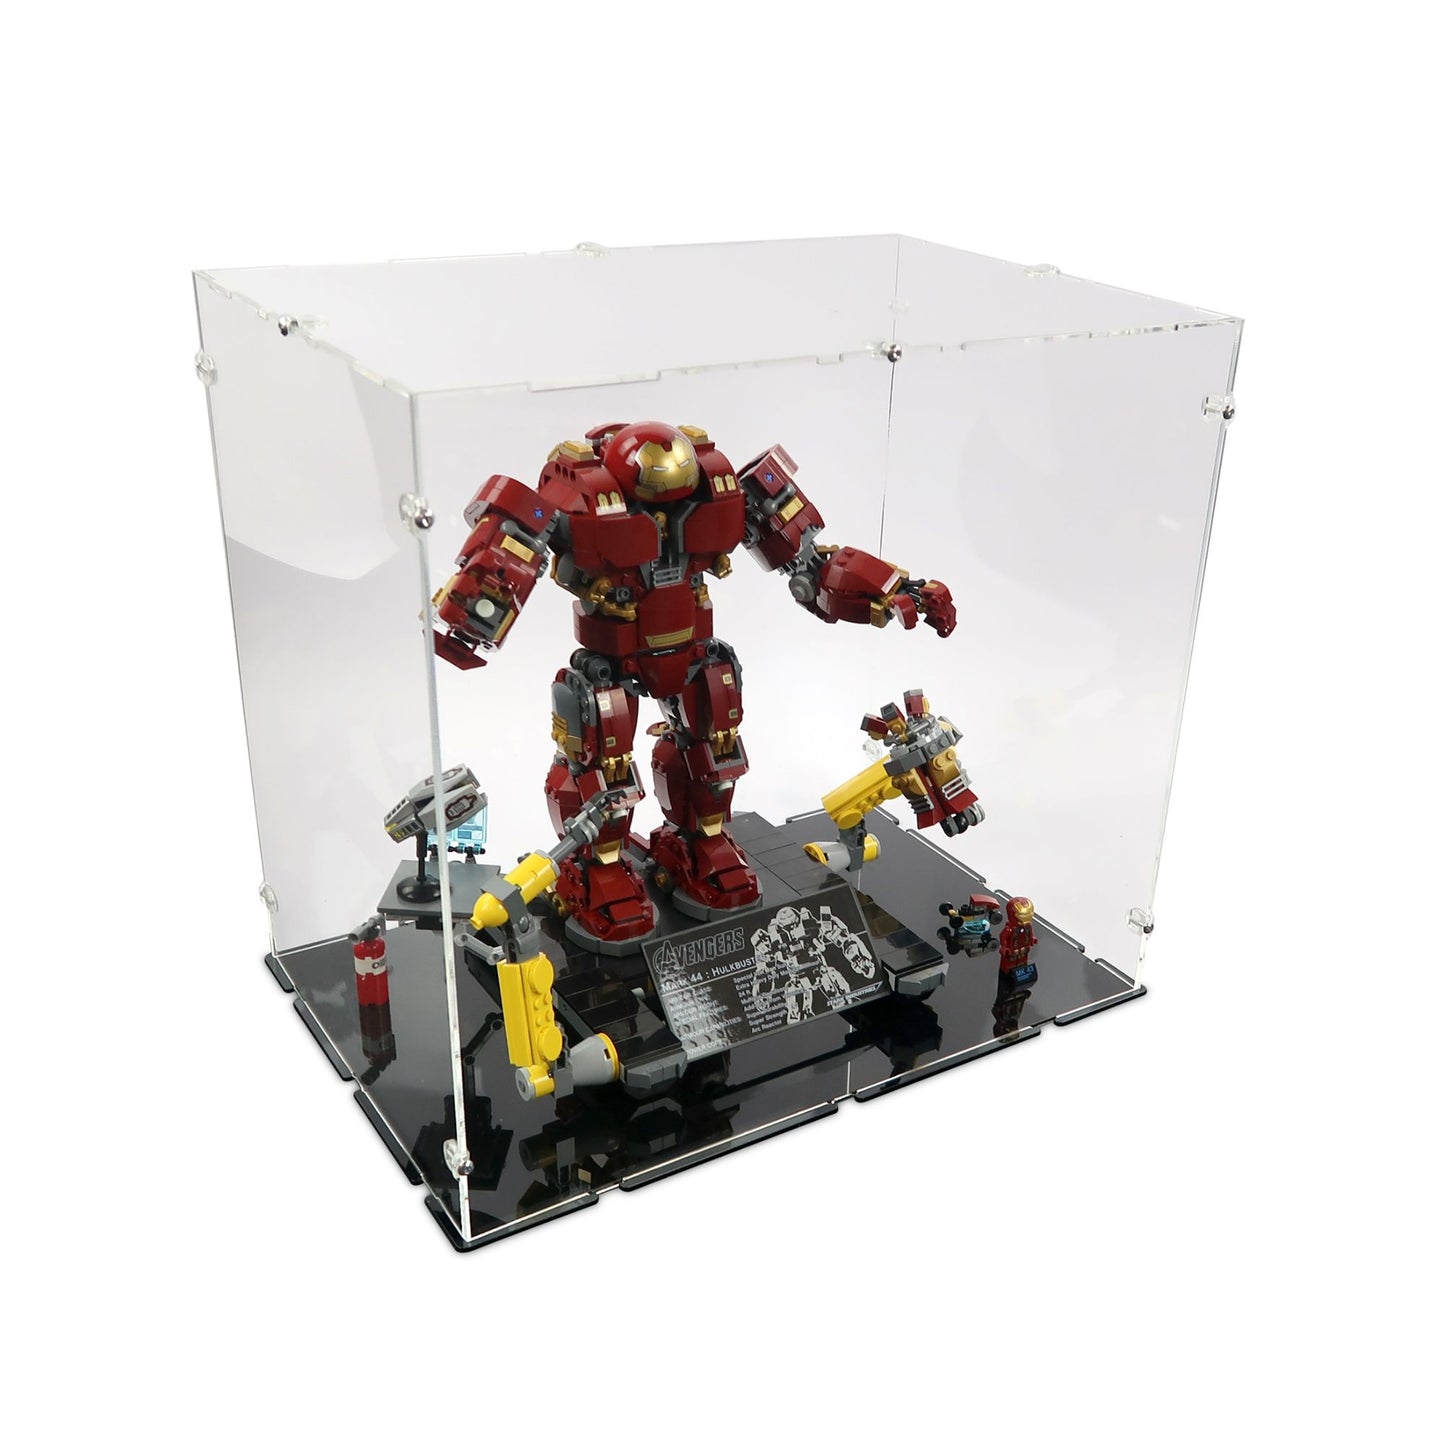 76105 The Hulkbuster - Ultron Edition Display Case